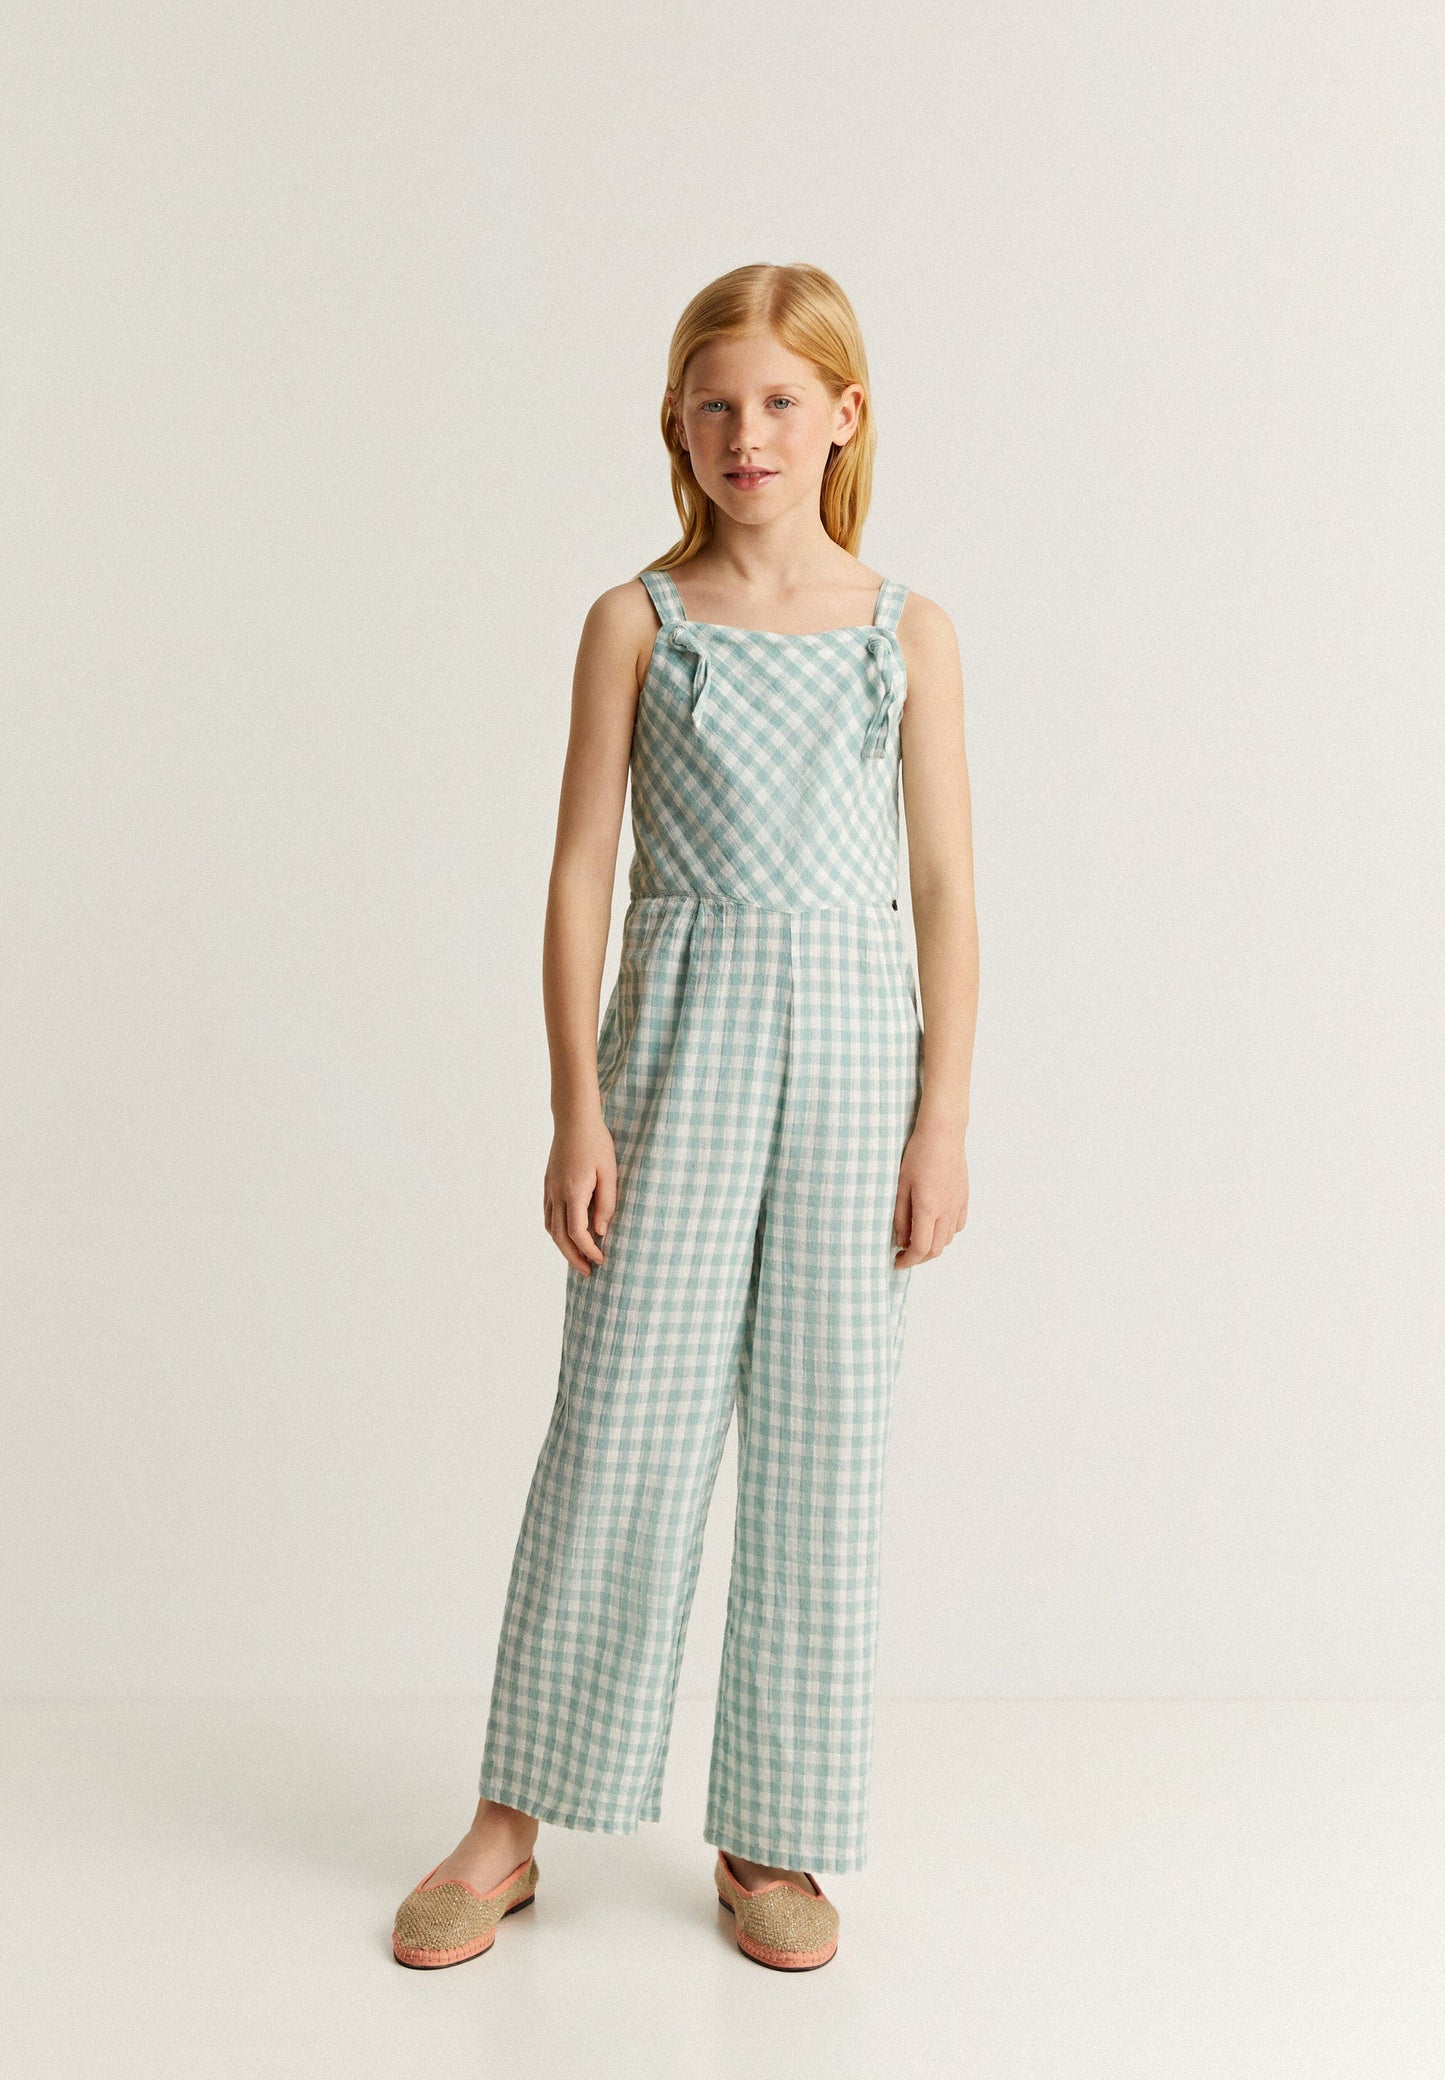 TEXTURED GINGHAM DUNGAREES